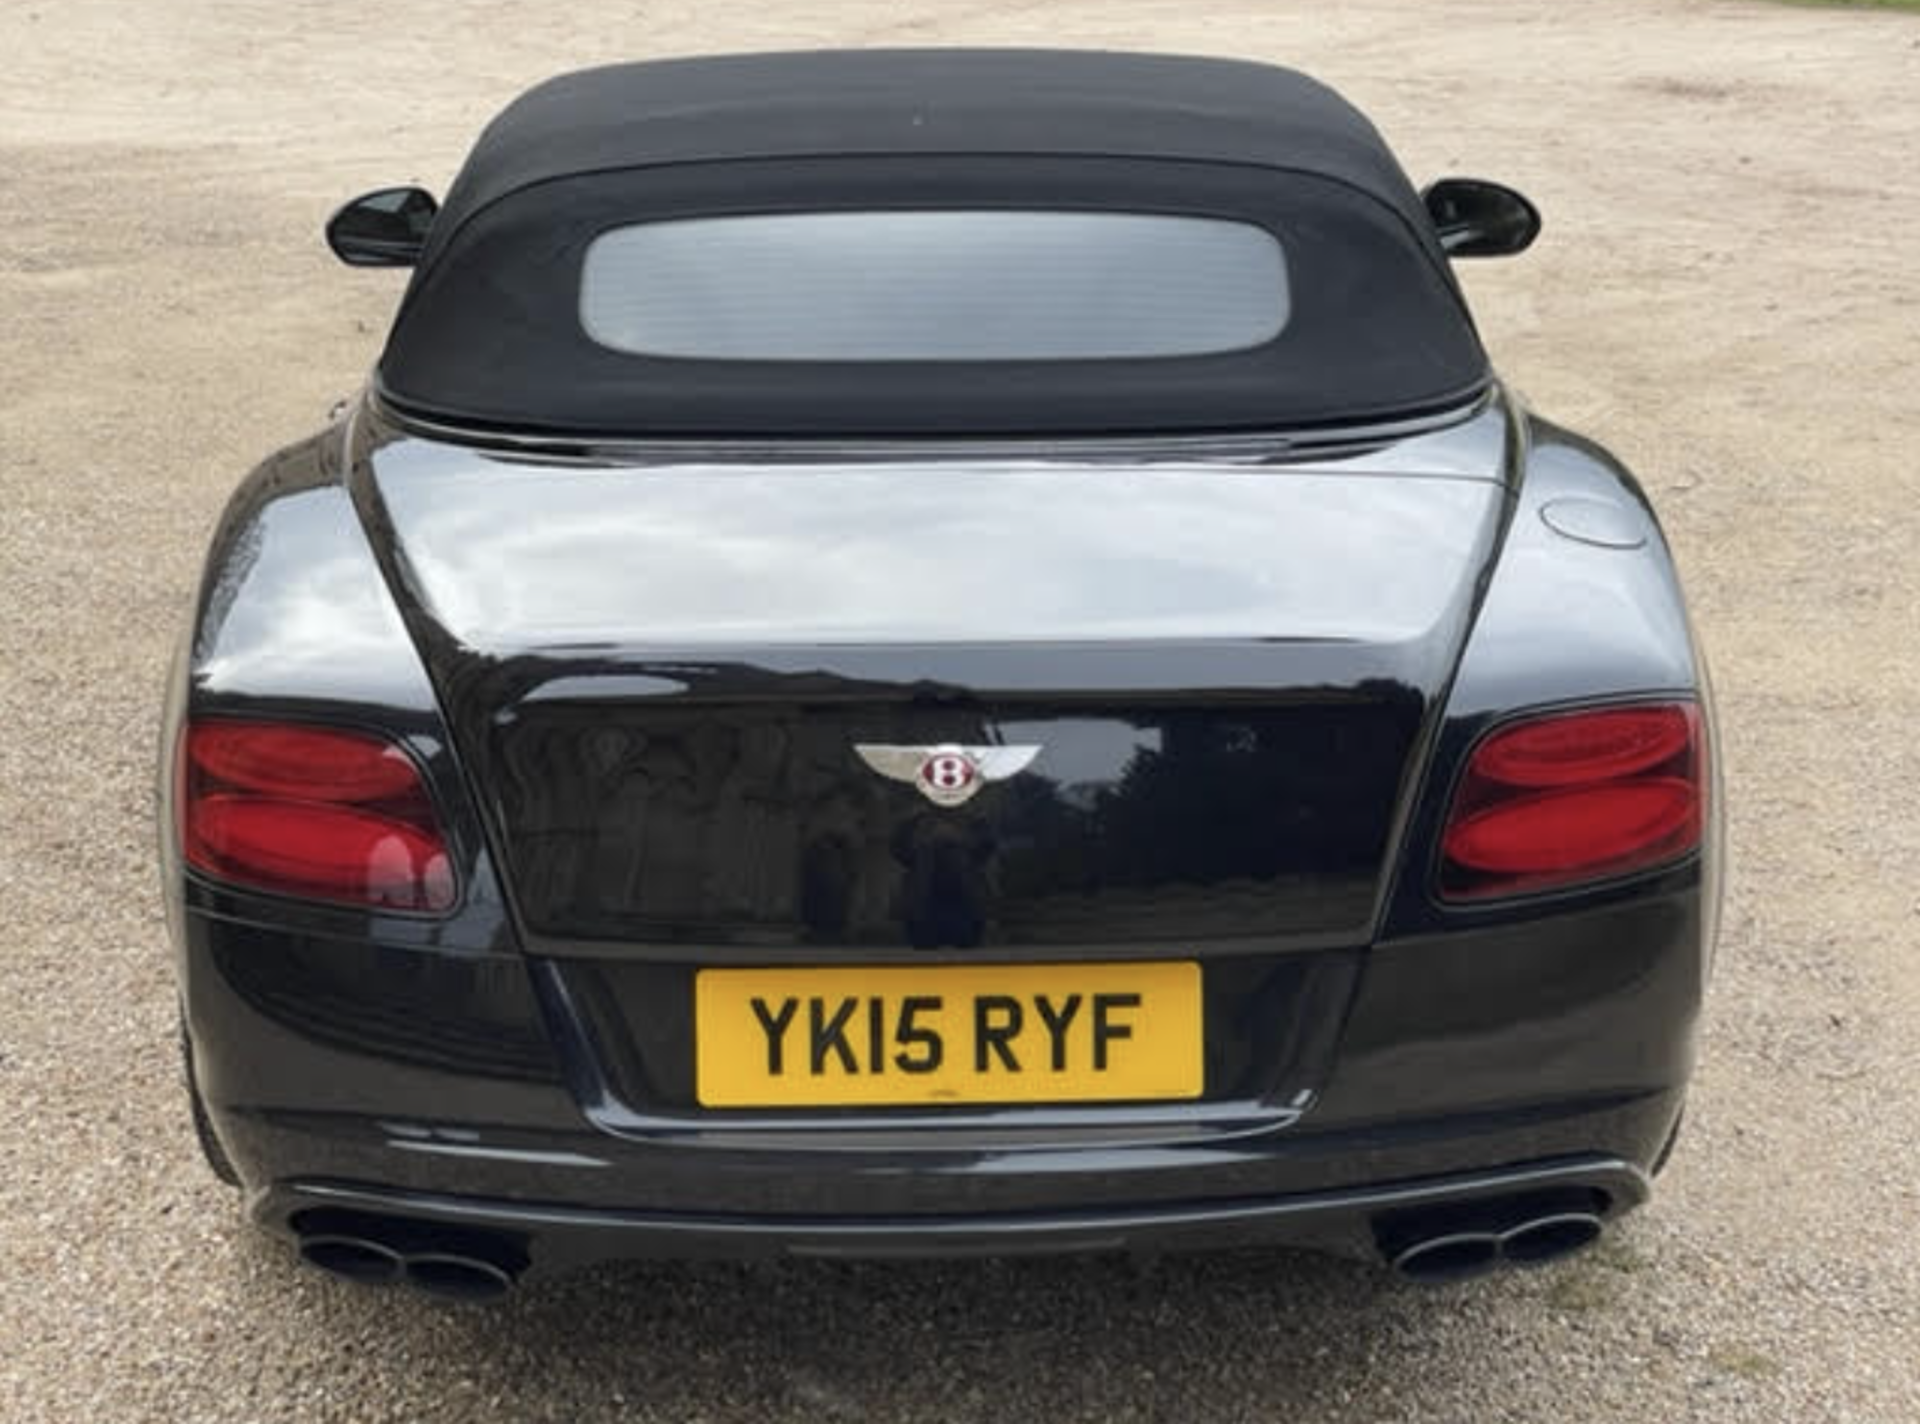 2015 Bentley Continental GTC 4.0 V8 S 2dr Auto Concourse series - Black pack 58,000 miles Full S/H - Image 6 of 18